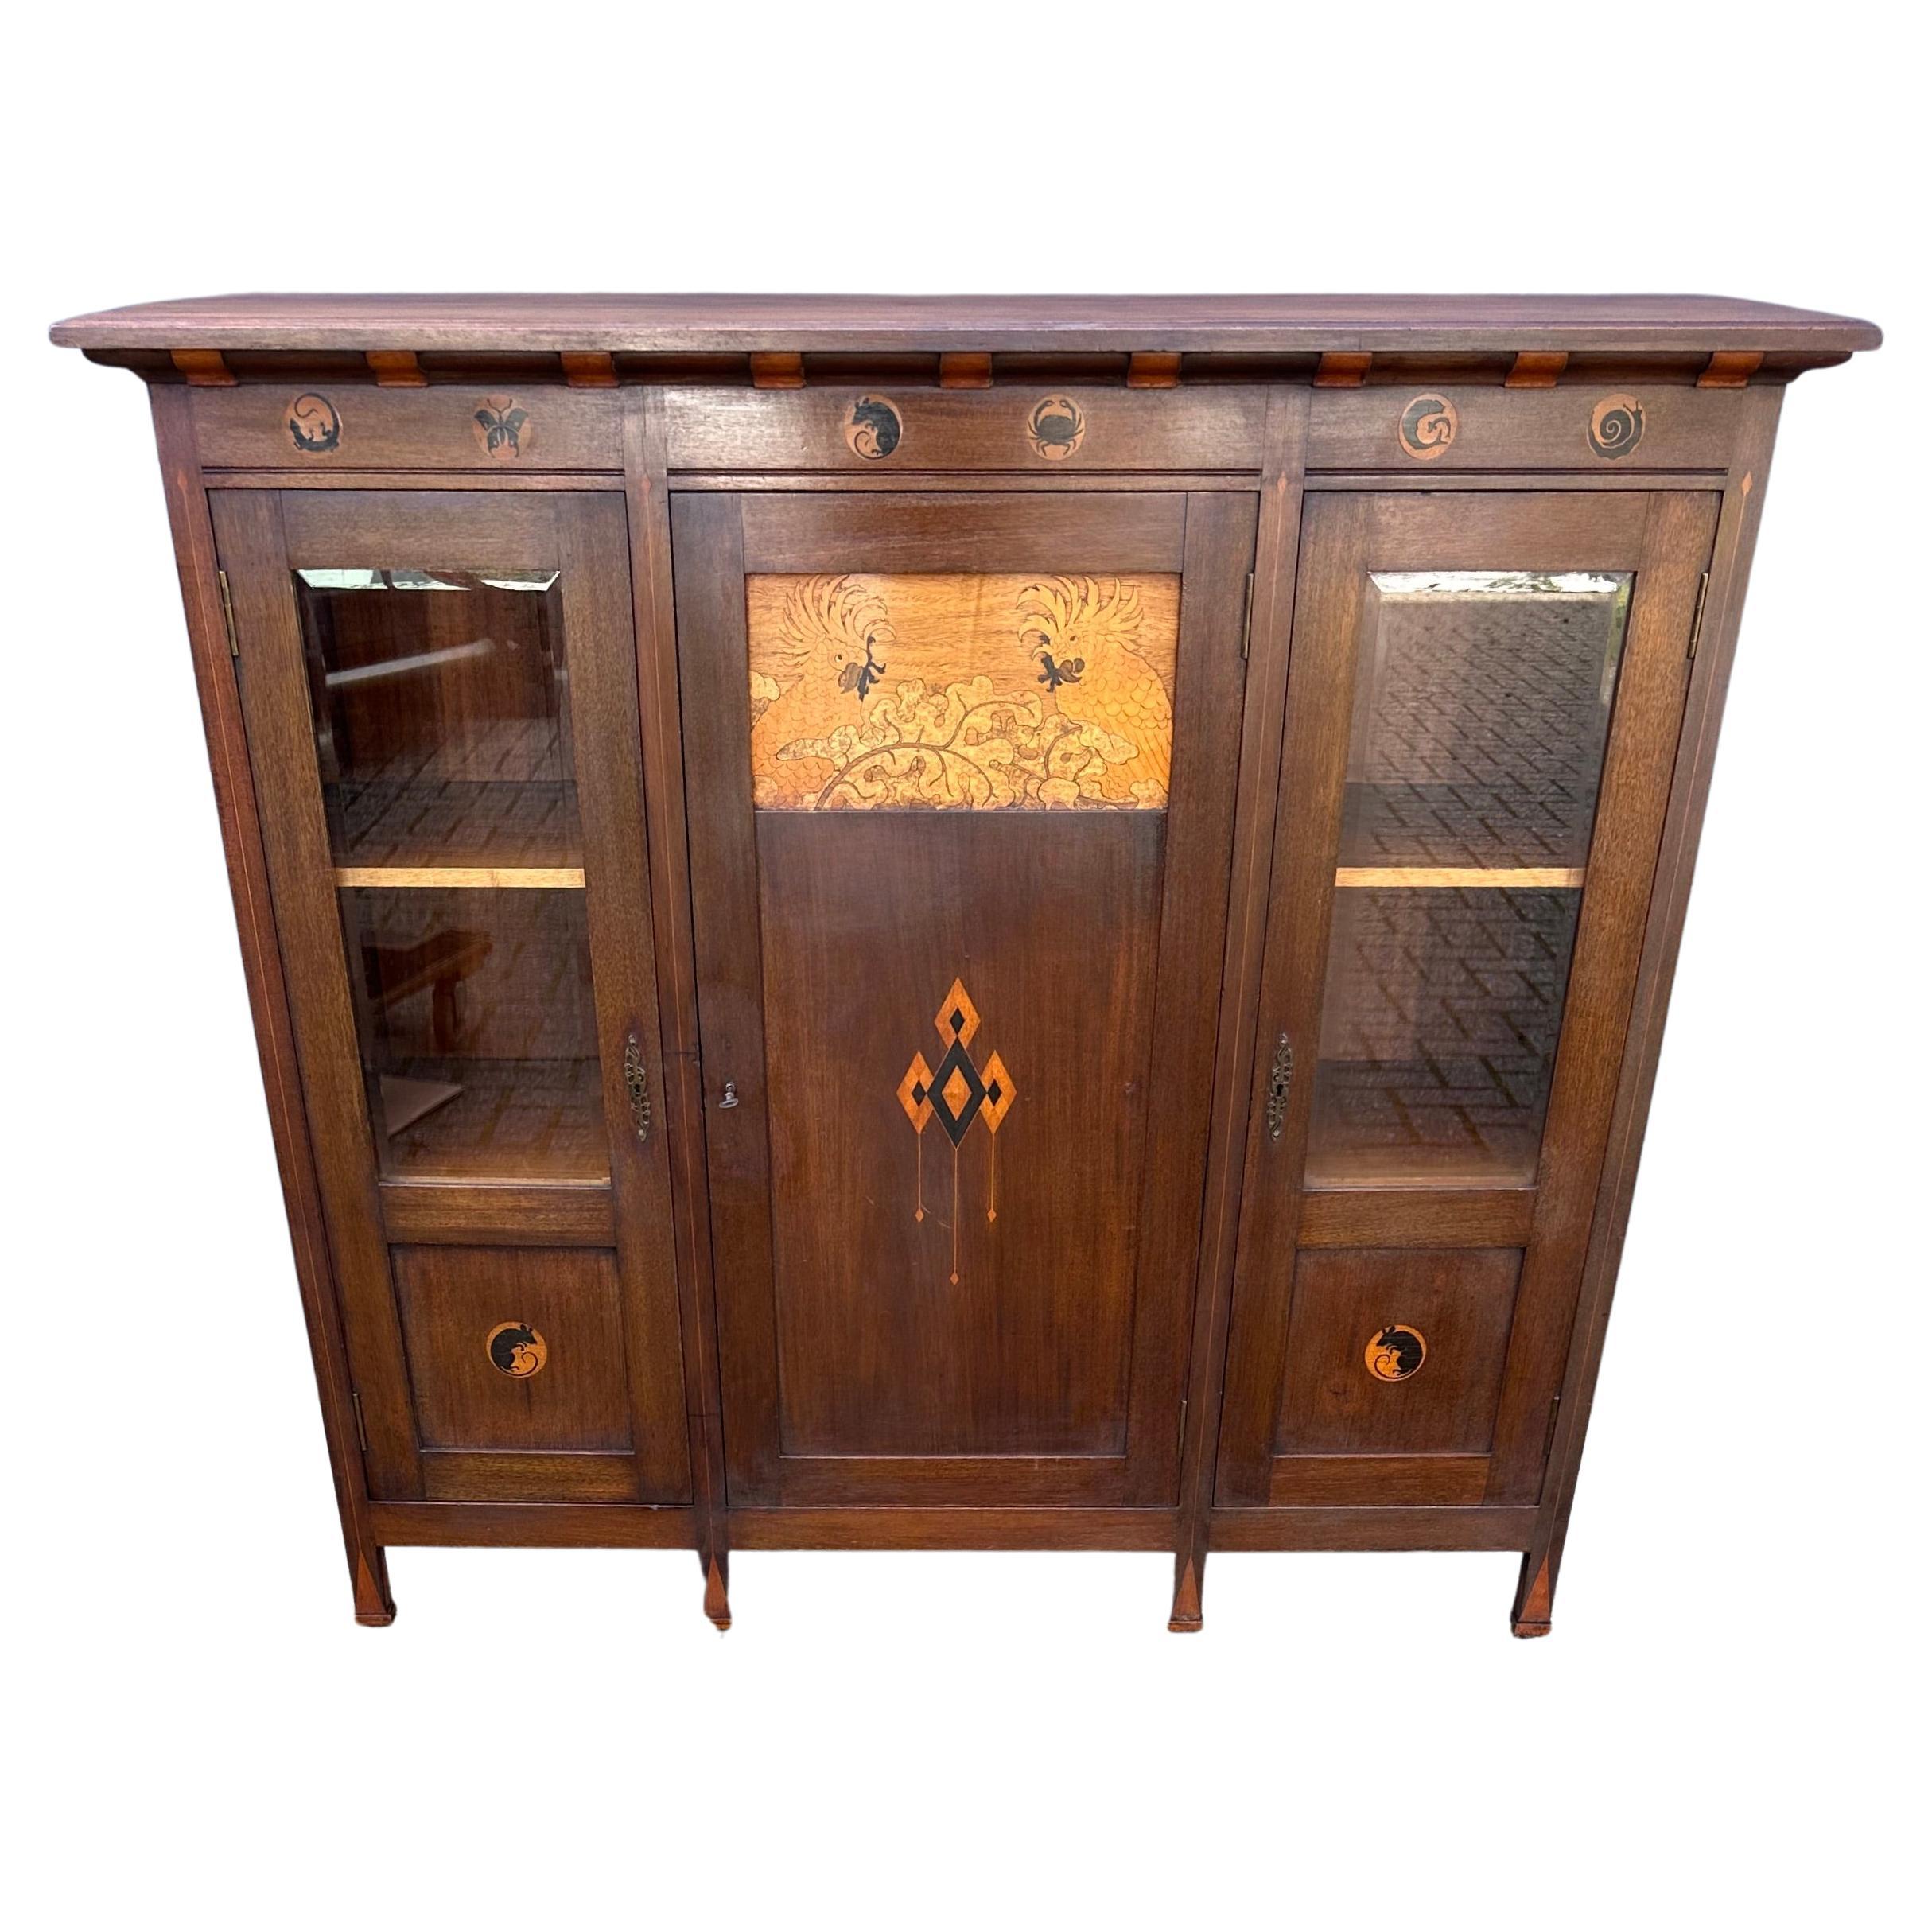 Important & Unique Arts & Crafts Bookcase Sideboard Cabinet by Napoleon Le Grand For Sale